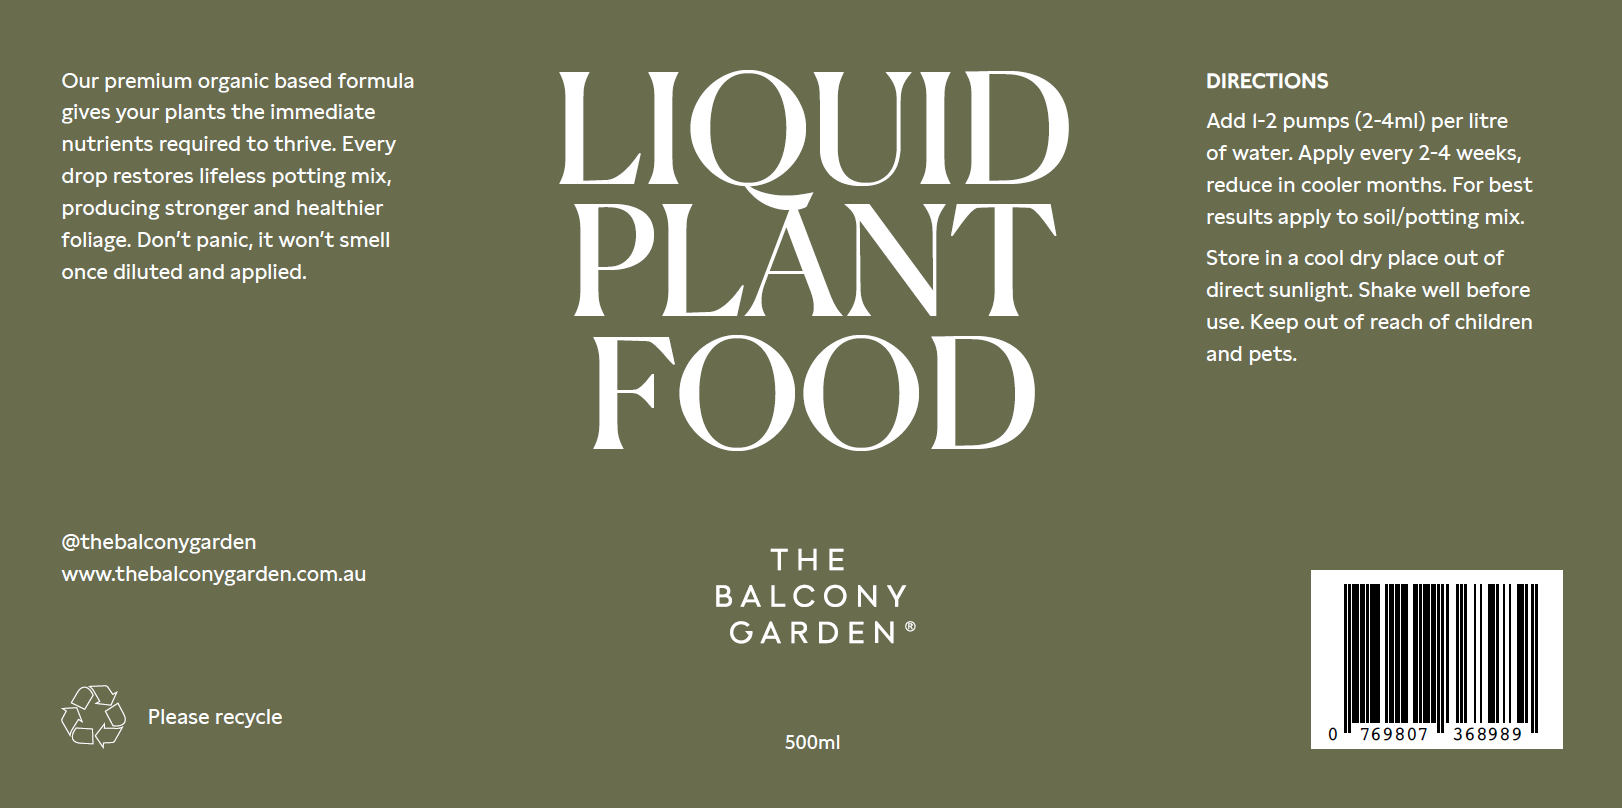 The olive coloured label saying "Liquid Plant Food, The Balcony Garden" along with directions for use.